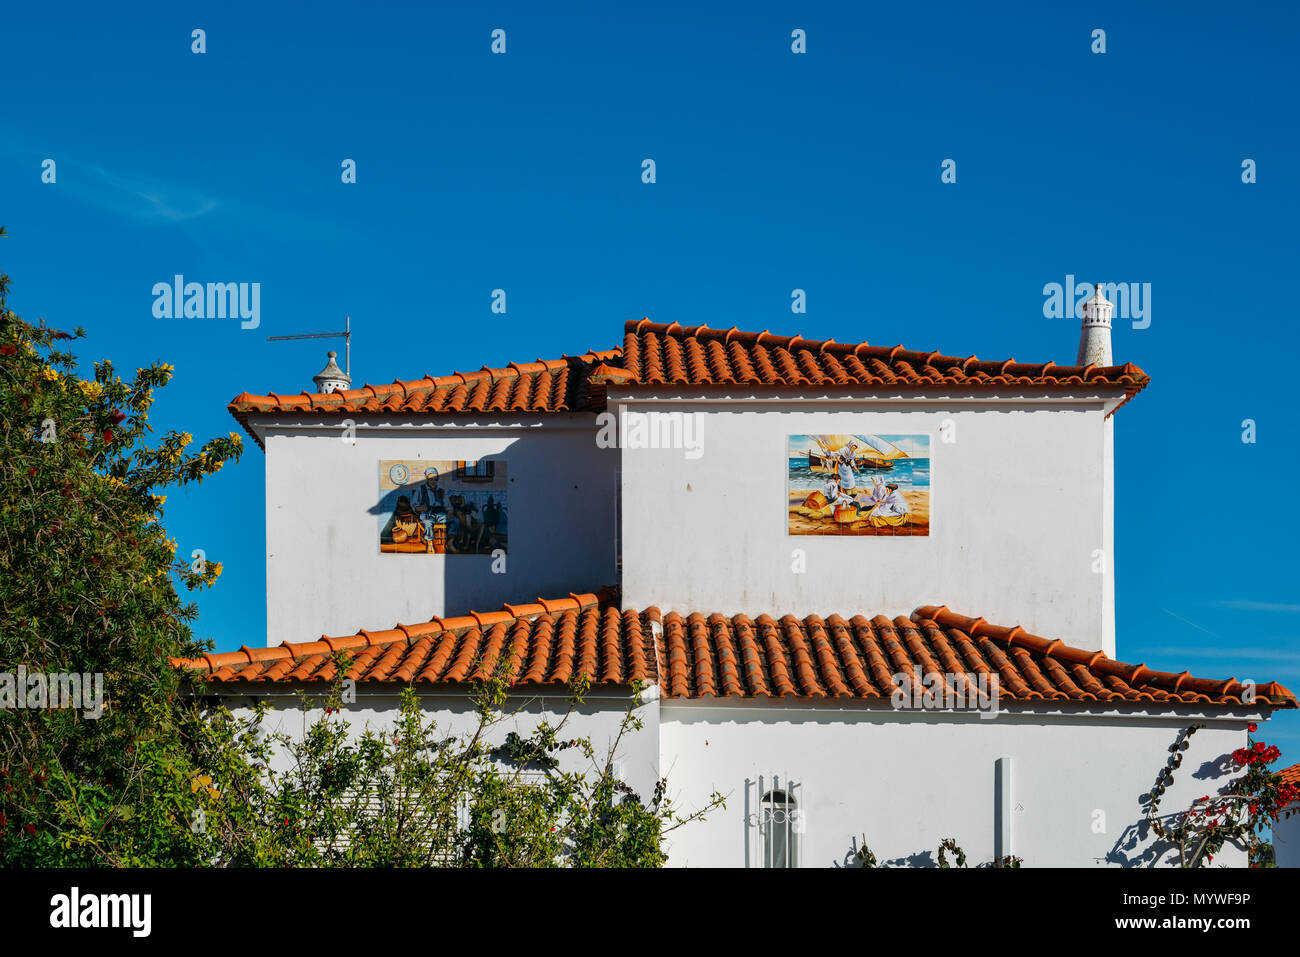 Tile drawings on a side of a building depicting Portuguese culture including life near the seaside Stock Photo